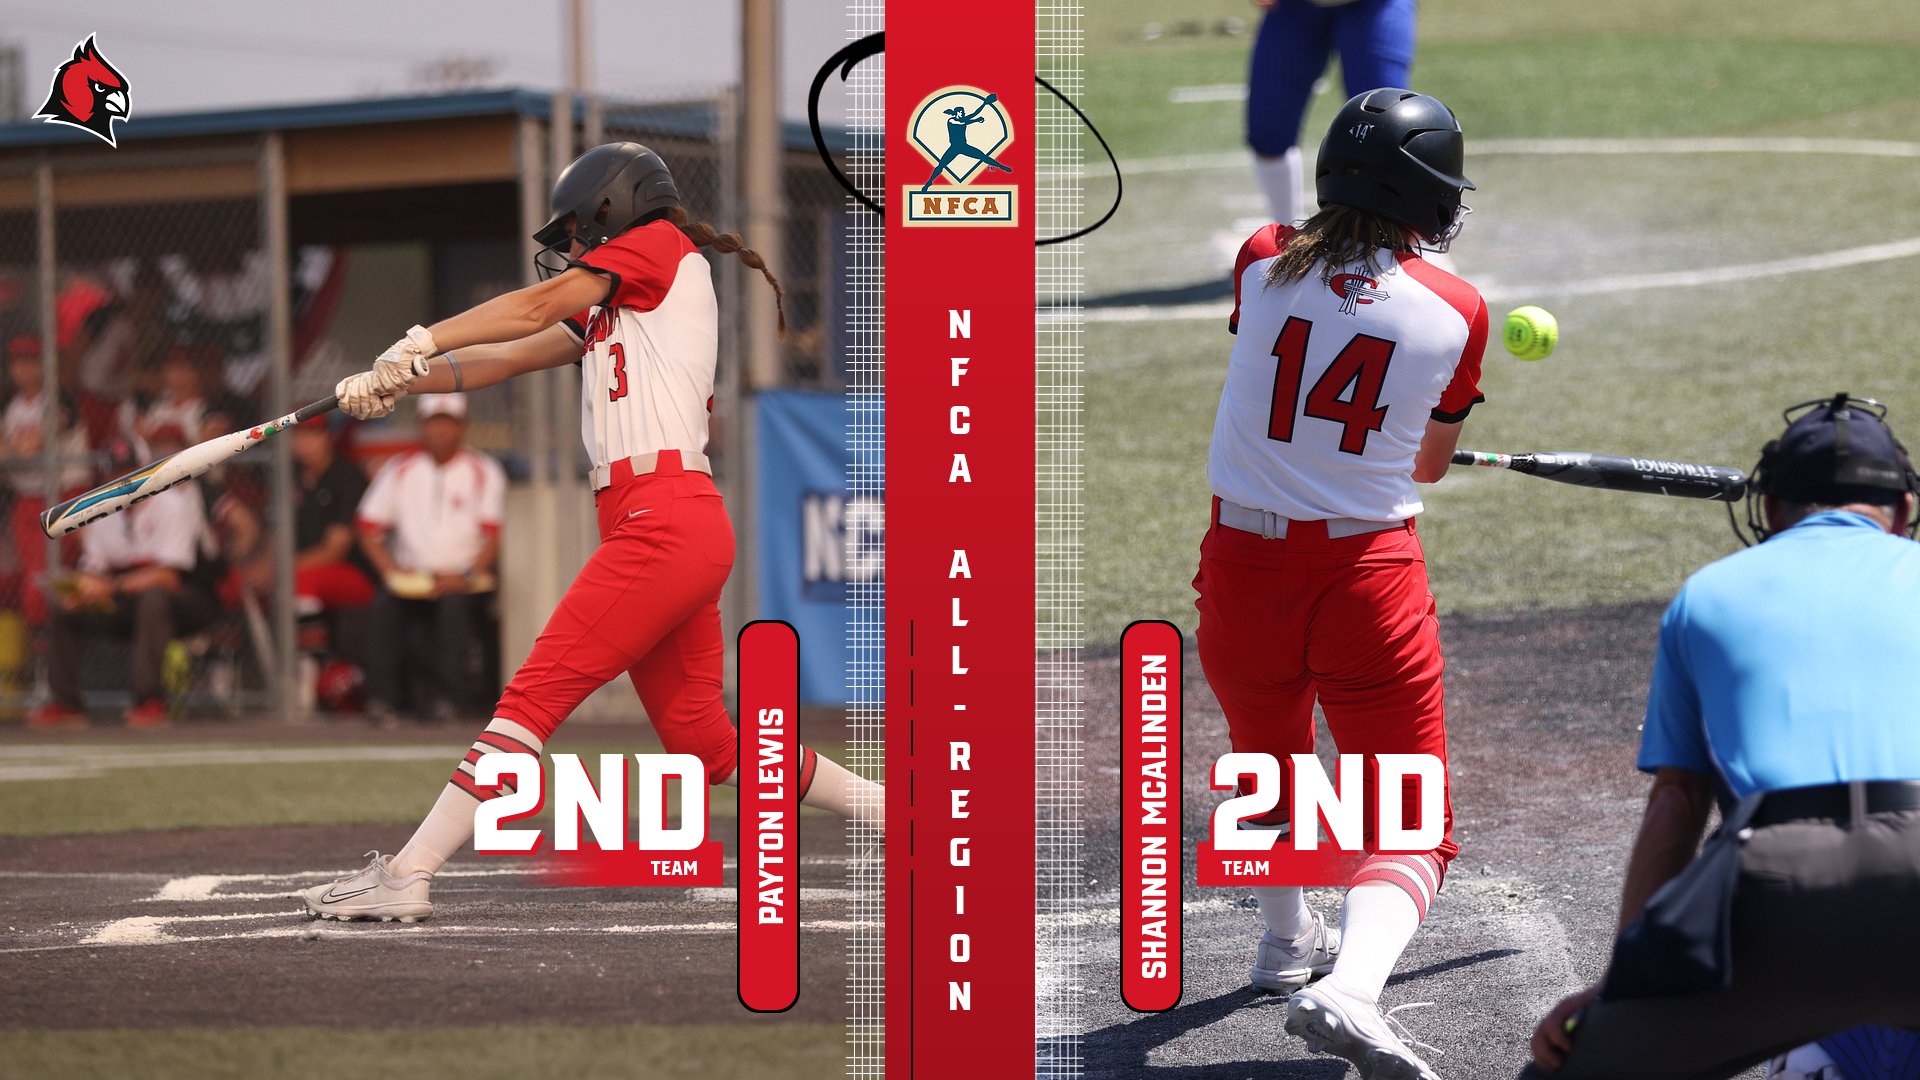 McAlinden and Lewis earn NFCA All-Region honors